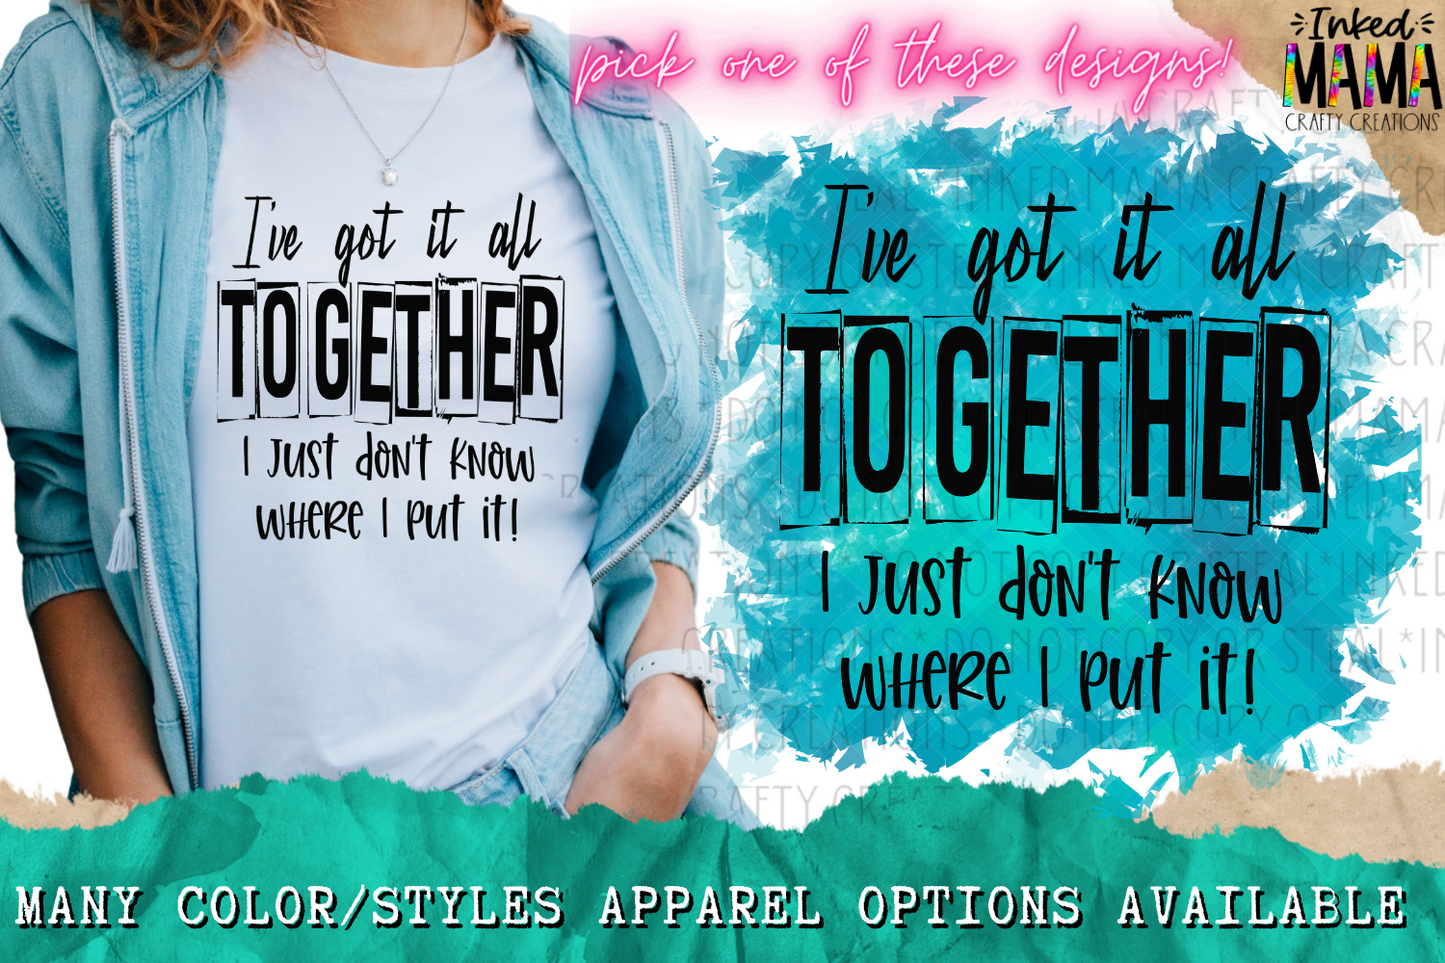 I’ve got it all together I just don’t know where I put it - Apparel